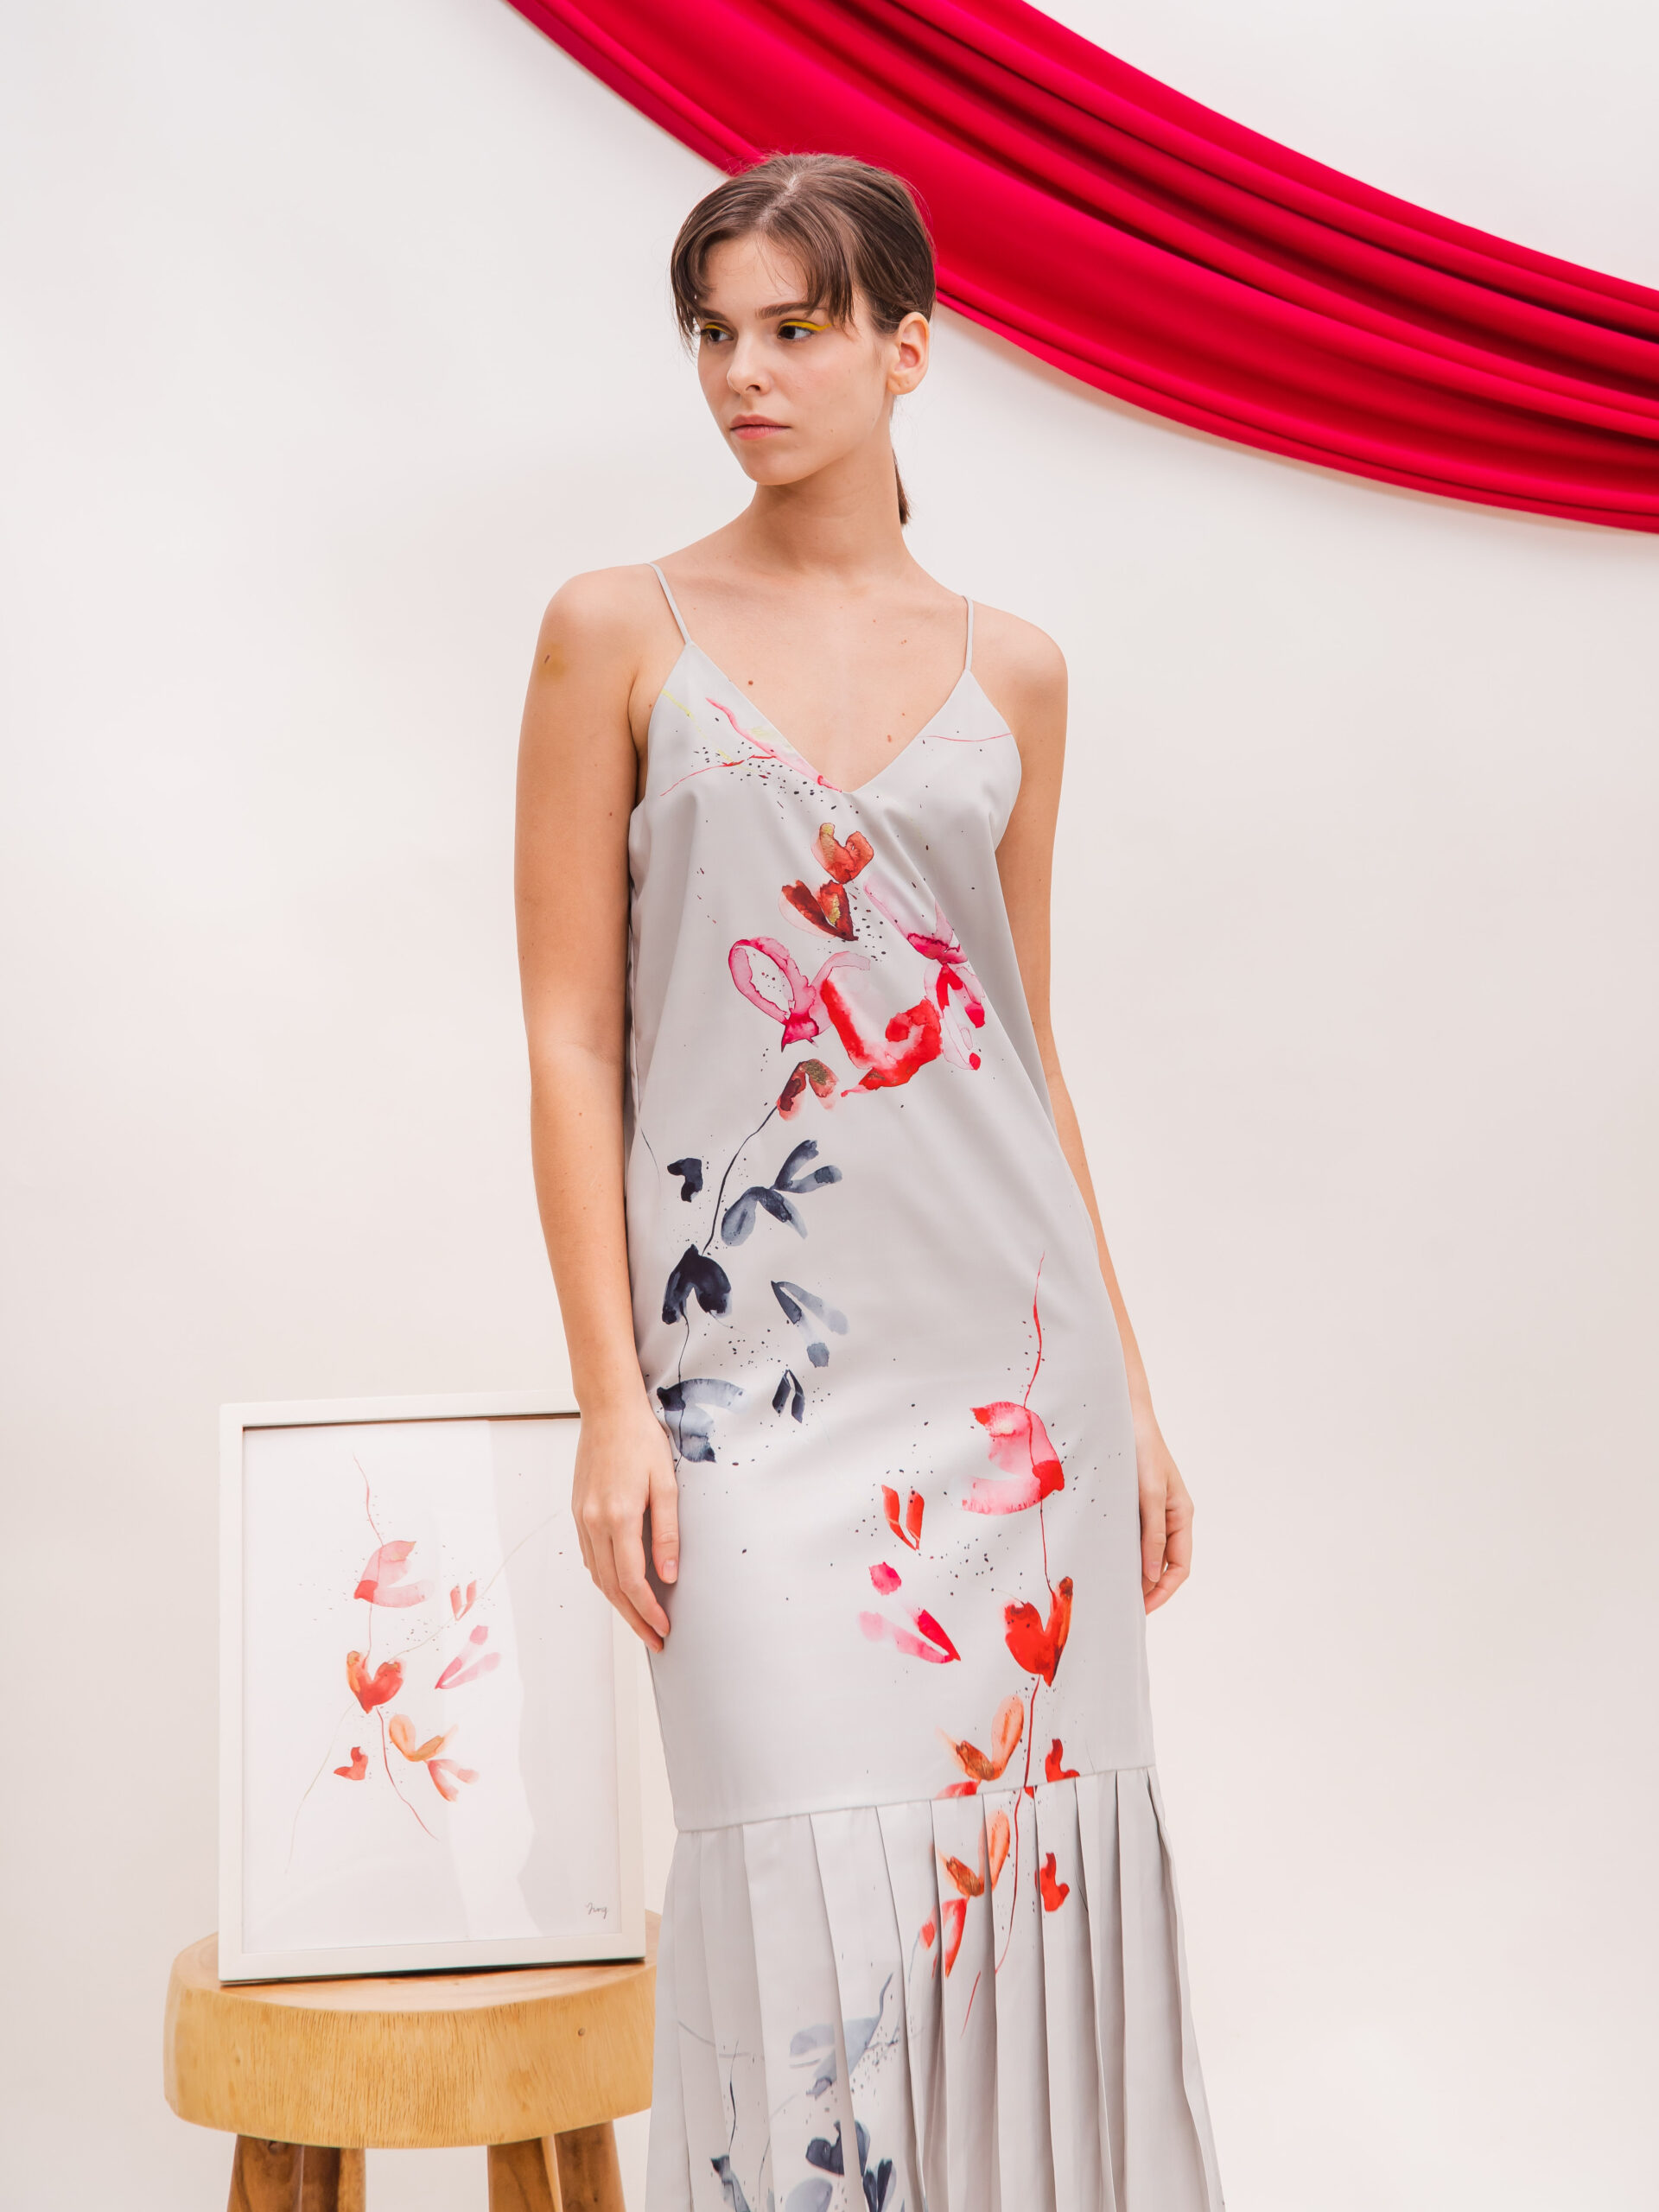 Ying x Jade II: Our Hearts Beating Dress - Ying the Label